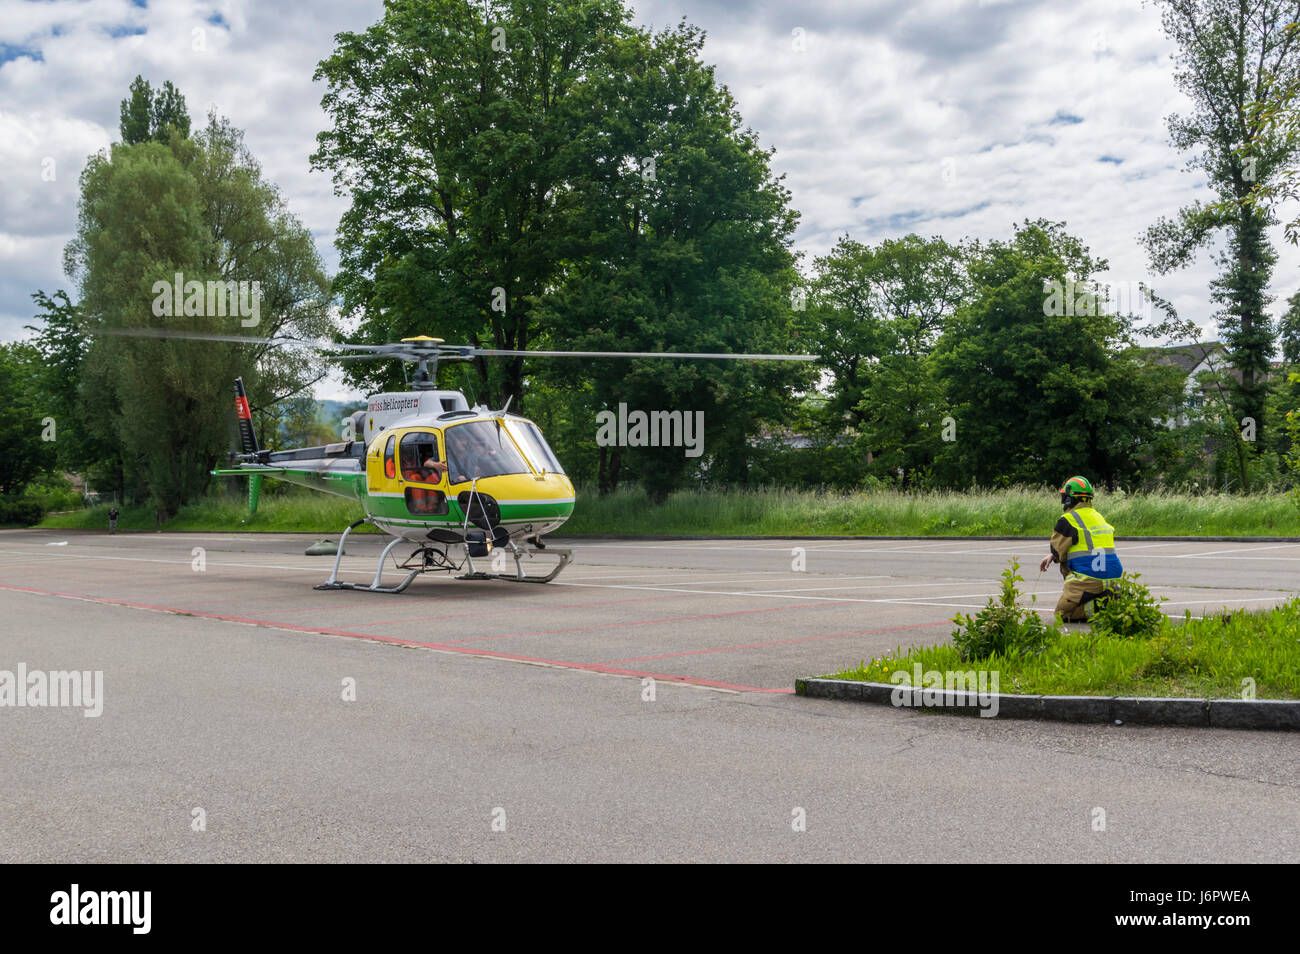 Aérospatiale/Eurocopter AS350 B3 'Écureuil' (Airbus Helicopters H125) landing on a parking lot. Helicopter operated by Swiss Helicopter AG. Stock Photo